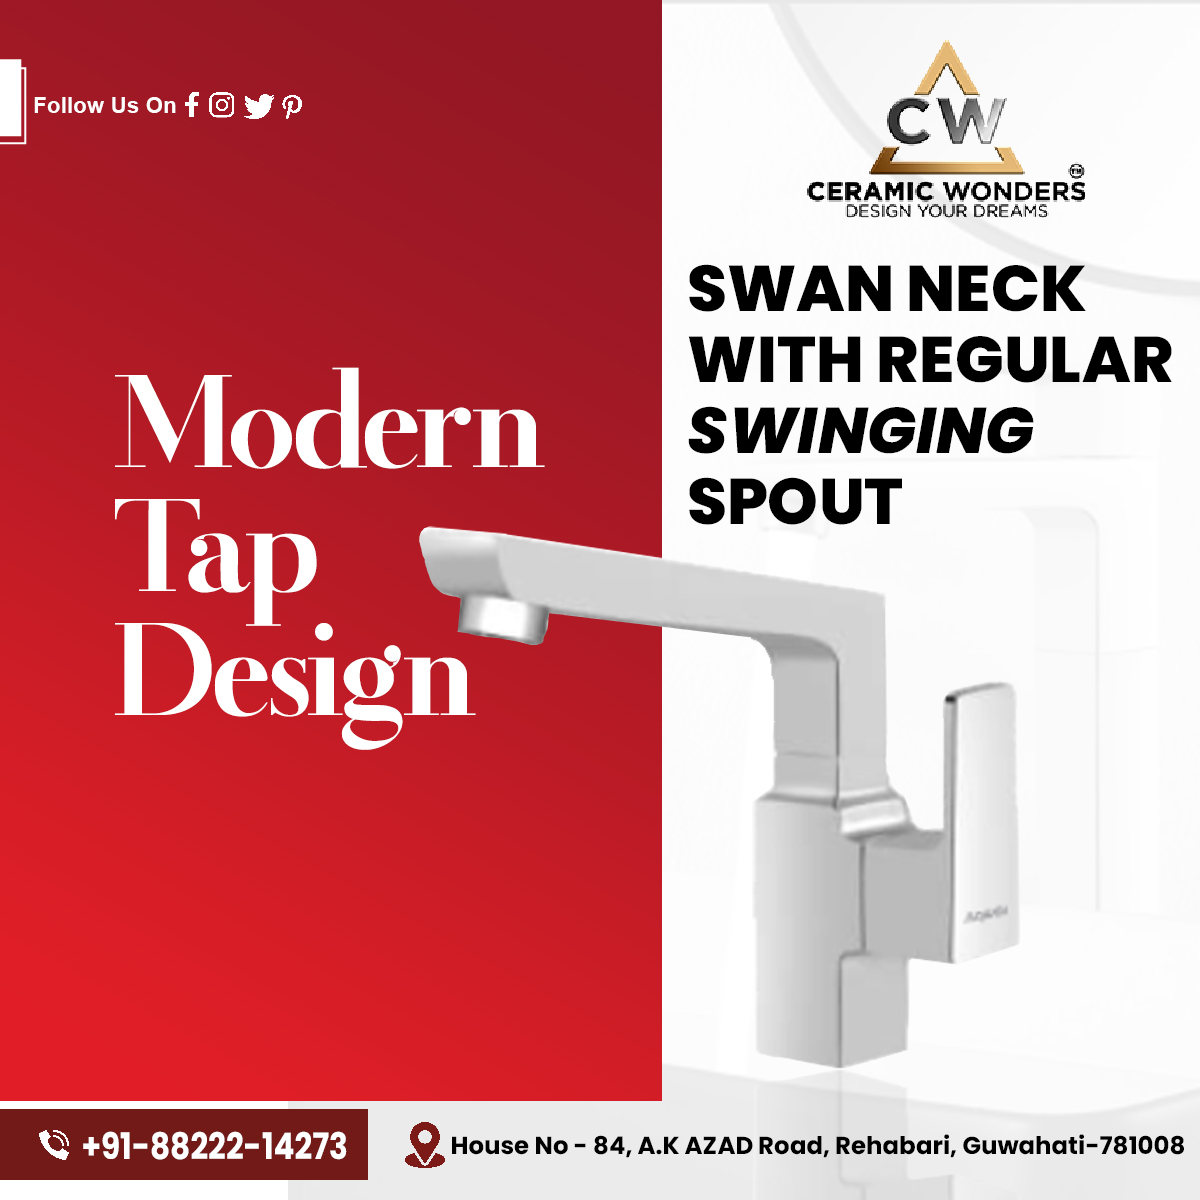 SWAN NECK WITH REGULAR SWAYING SPOUT 🦢 💦

Benefits:

Reaches every corner of your sink
Easy to fill pots and pans
Looks elegant and stylish
Long-lasting

#swanneckfaucet #faucet #kitchenfaucet #bathroomfaucet #swanneck #regularswingingspout #elegant #stylish #longlasting